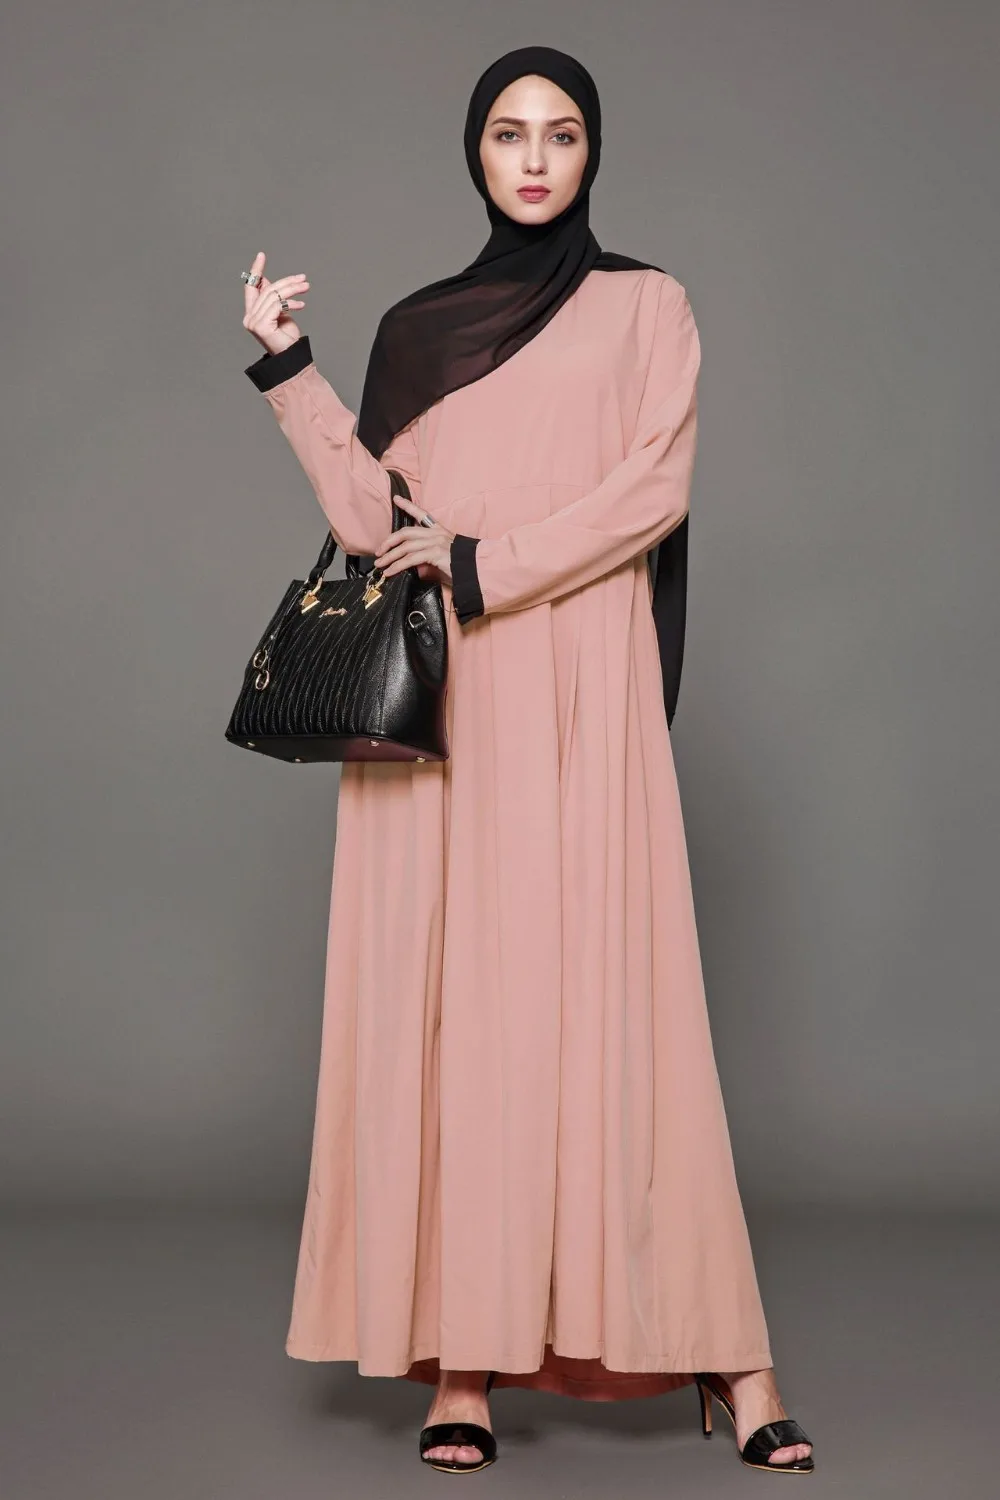 Open Before Jilbab With Lace For Women Clothes In Dubai Latest